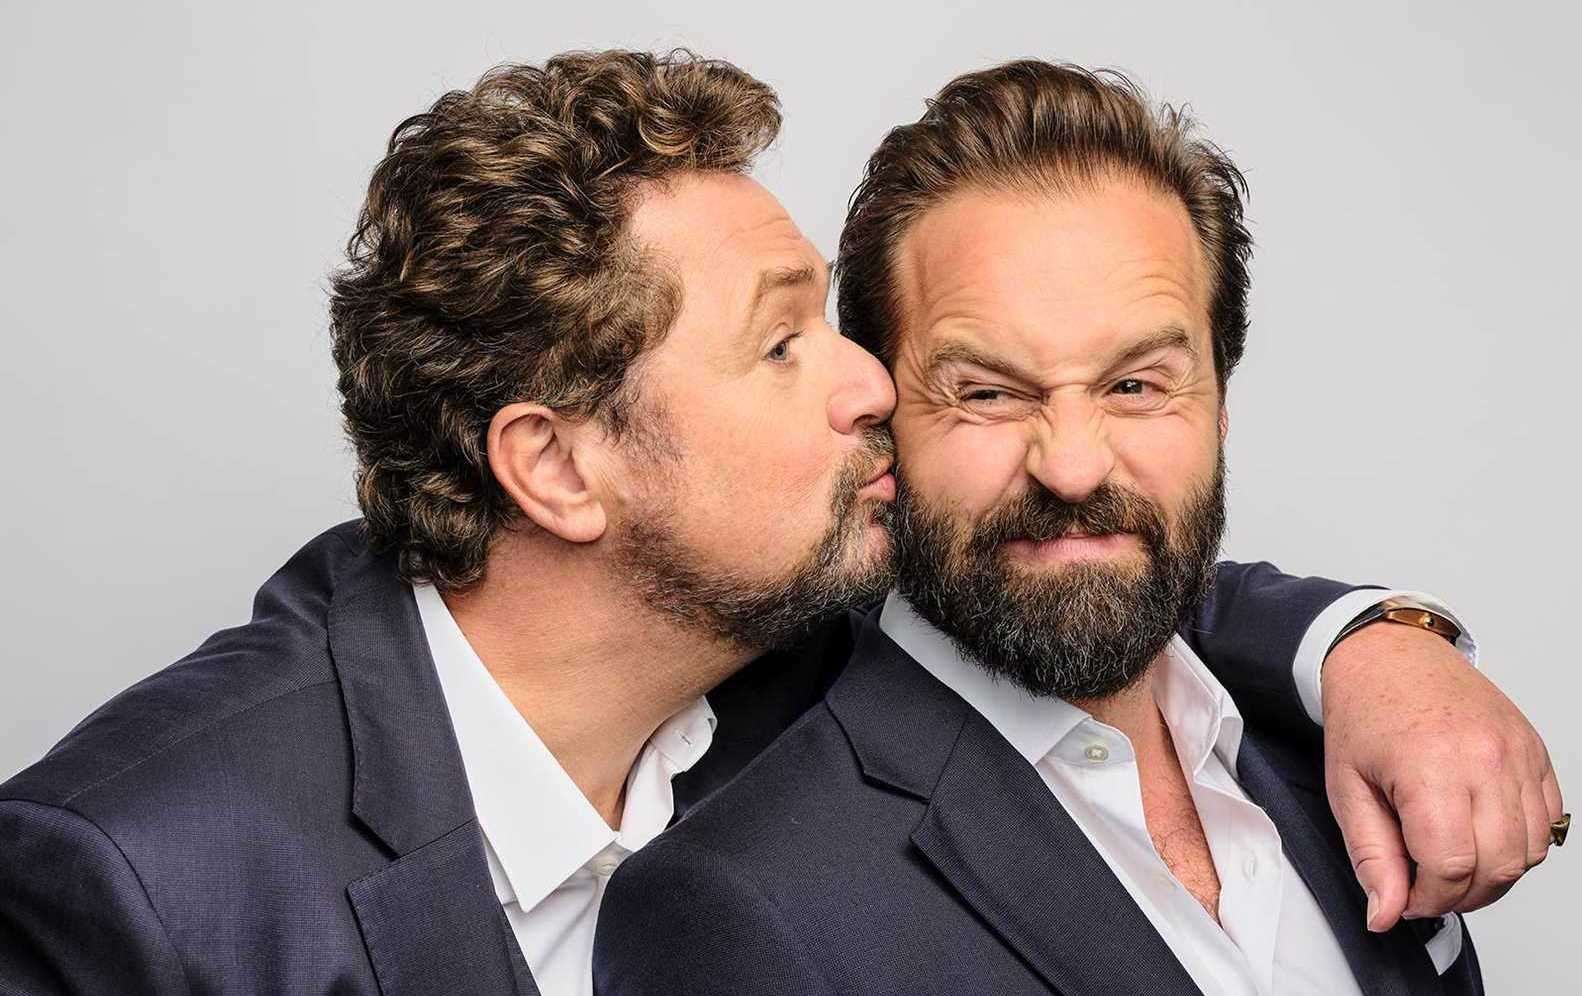 Michael Ball and Alfie Boe will be performing together again in Paddock Wood